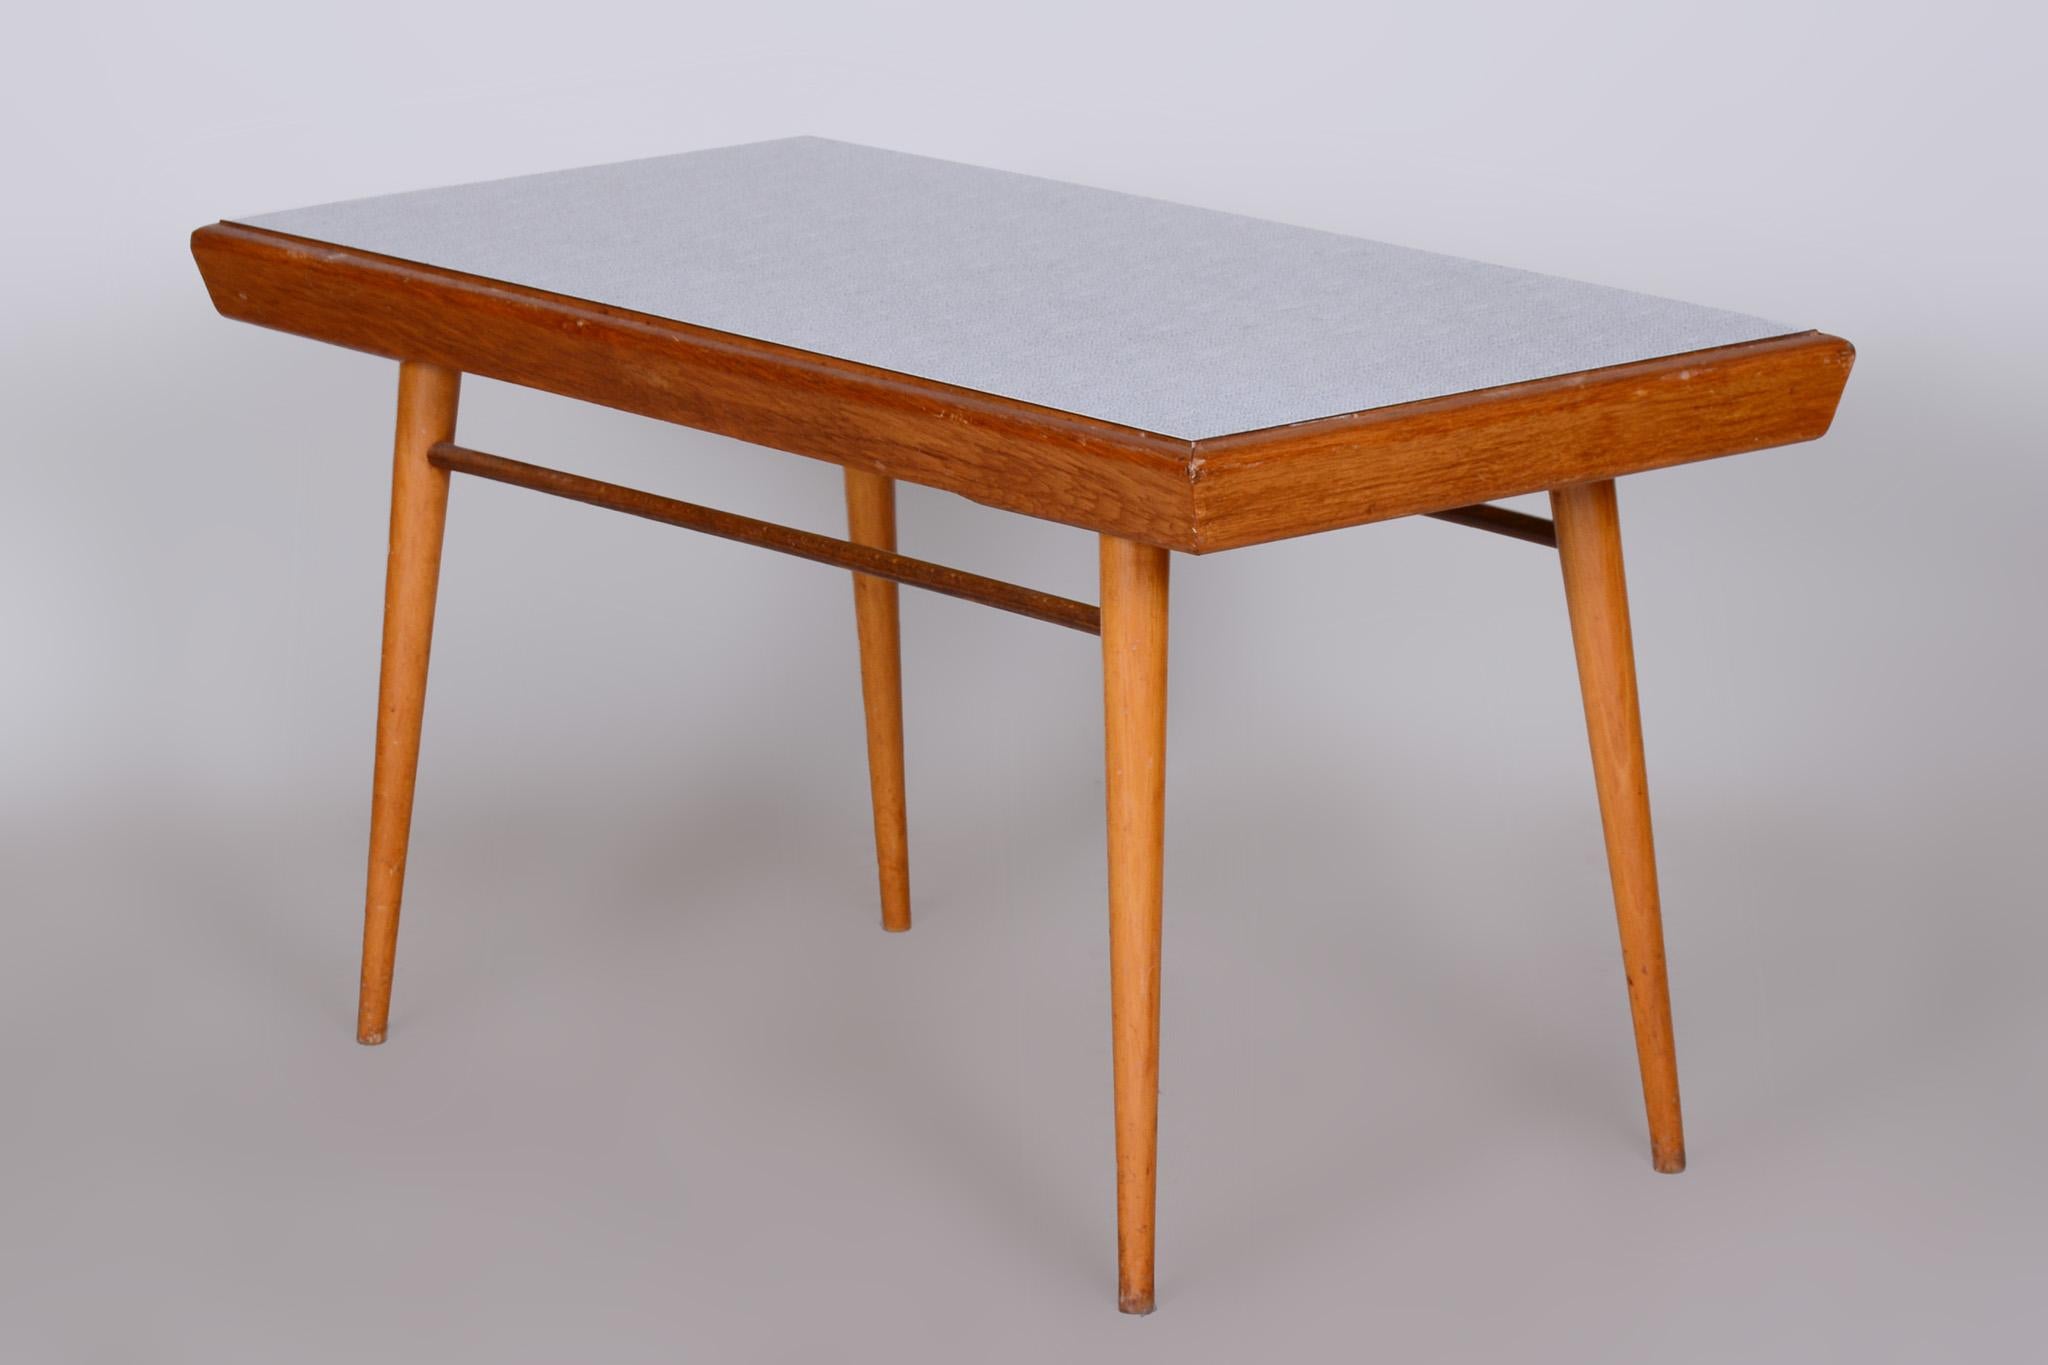 Mid-20th Century Oak Midcentury Coffee Table, Well-Preserved Condition, Czechia, 1950s For Sale